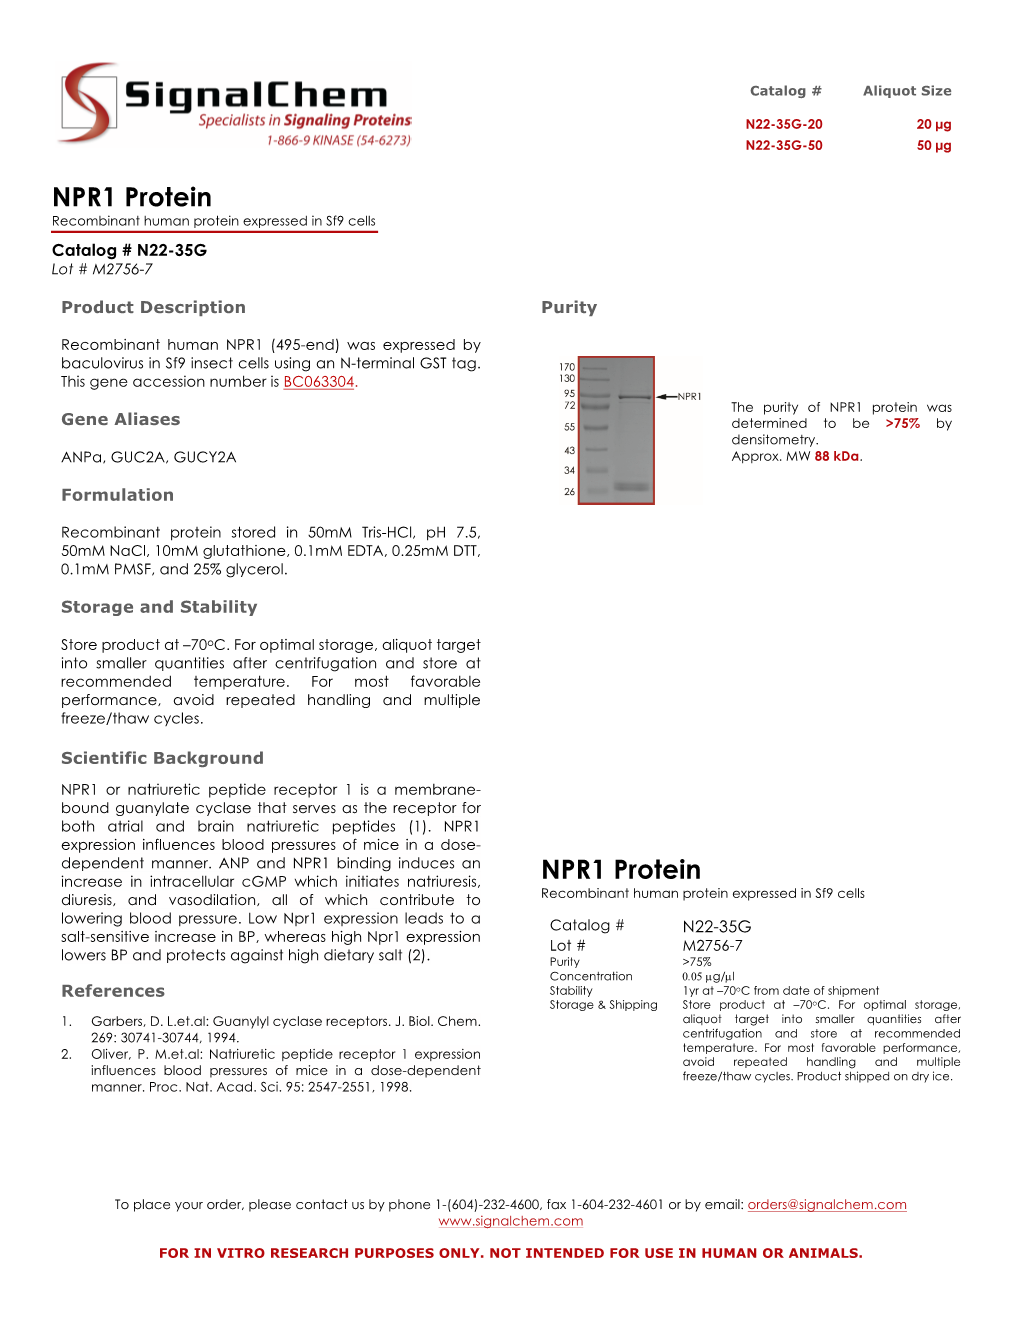 NPR1 Protein Recombinant Human Protein Expressed in Sf9 Cells